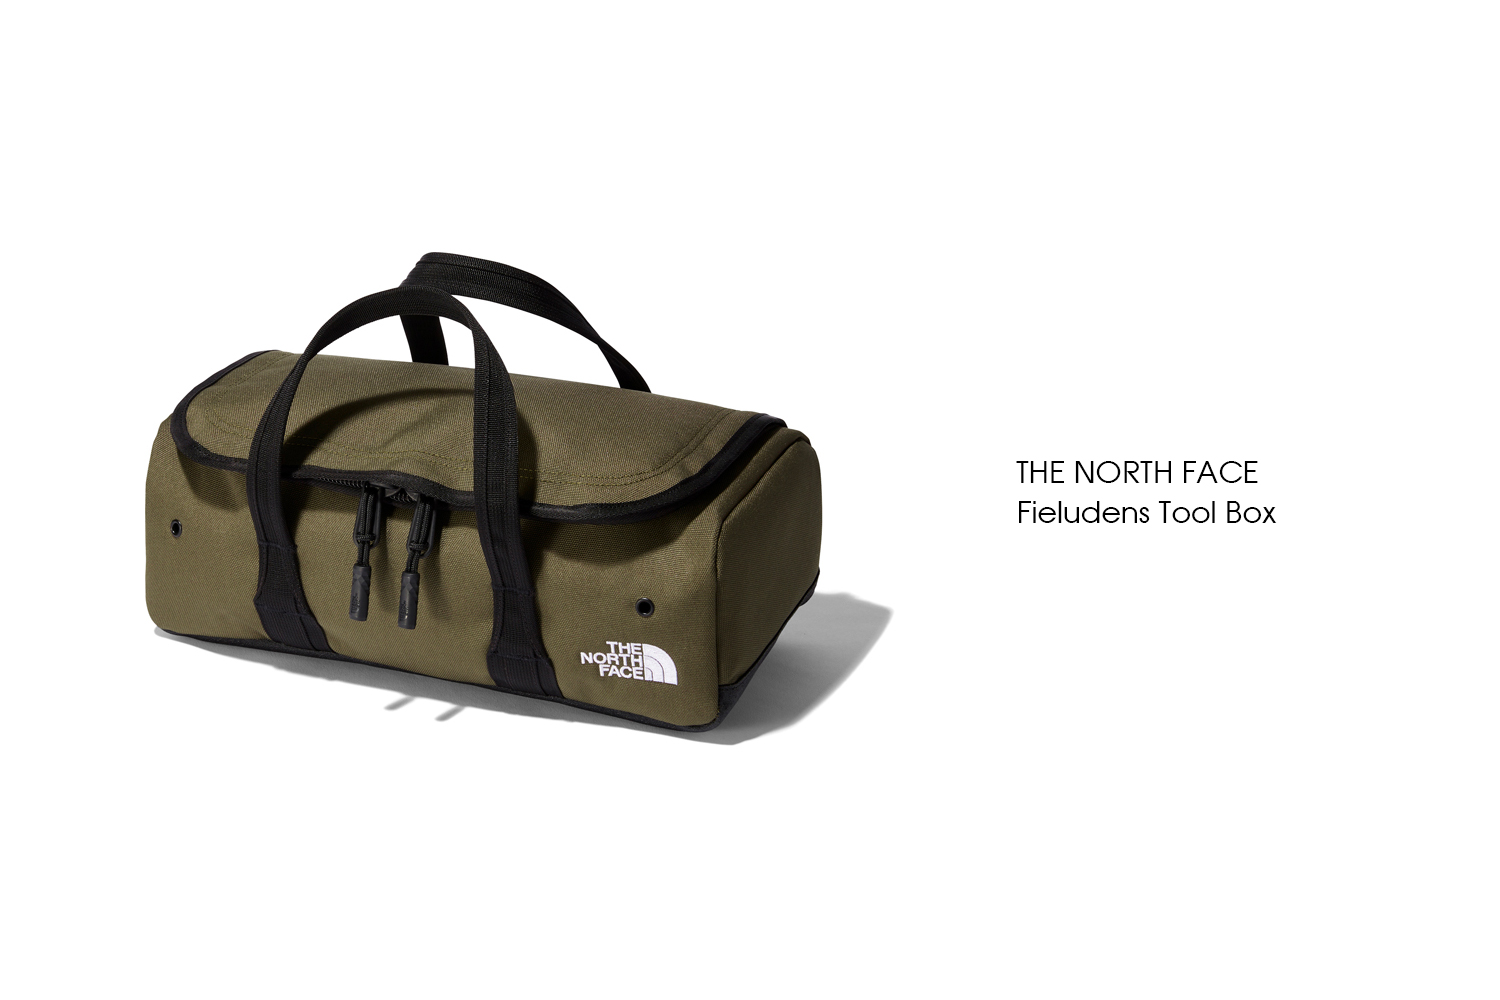 THE NORTH FACE "Fieludens Tool Box"